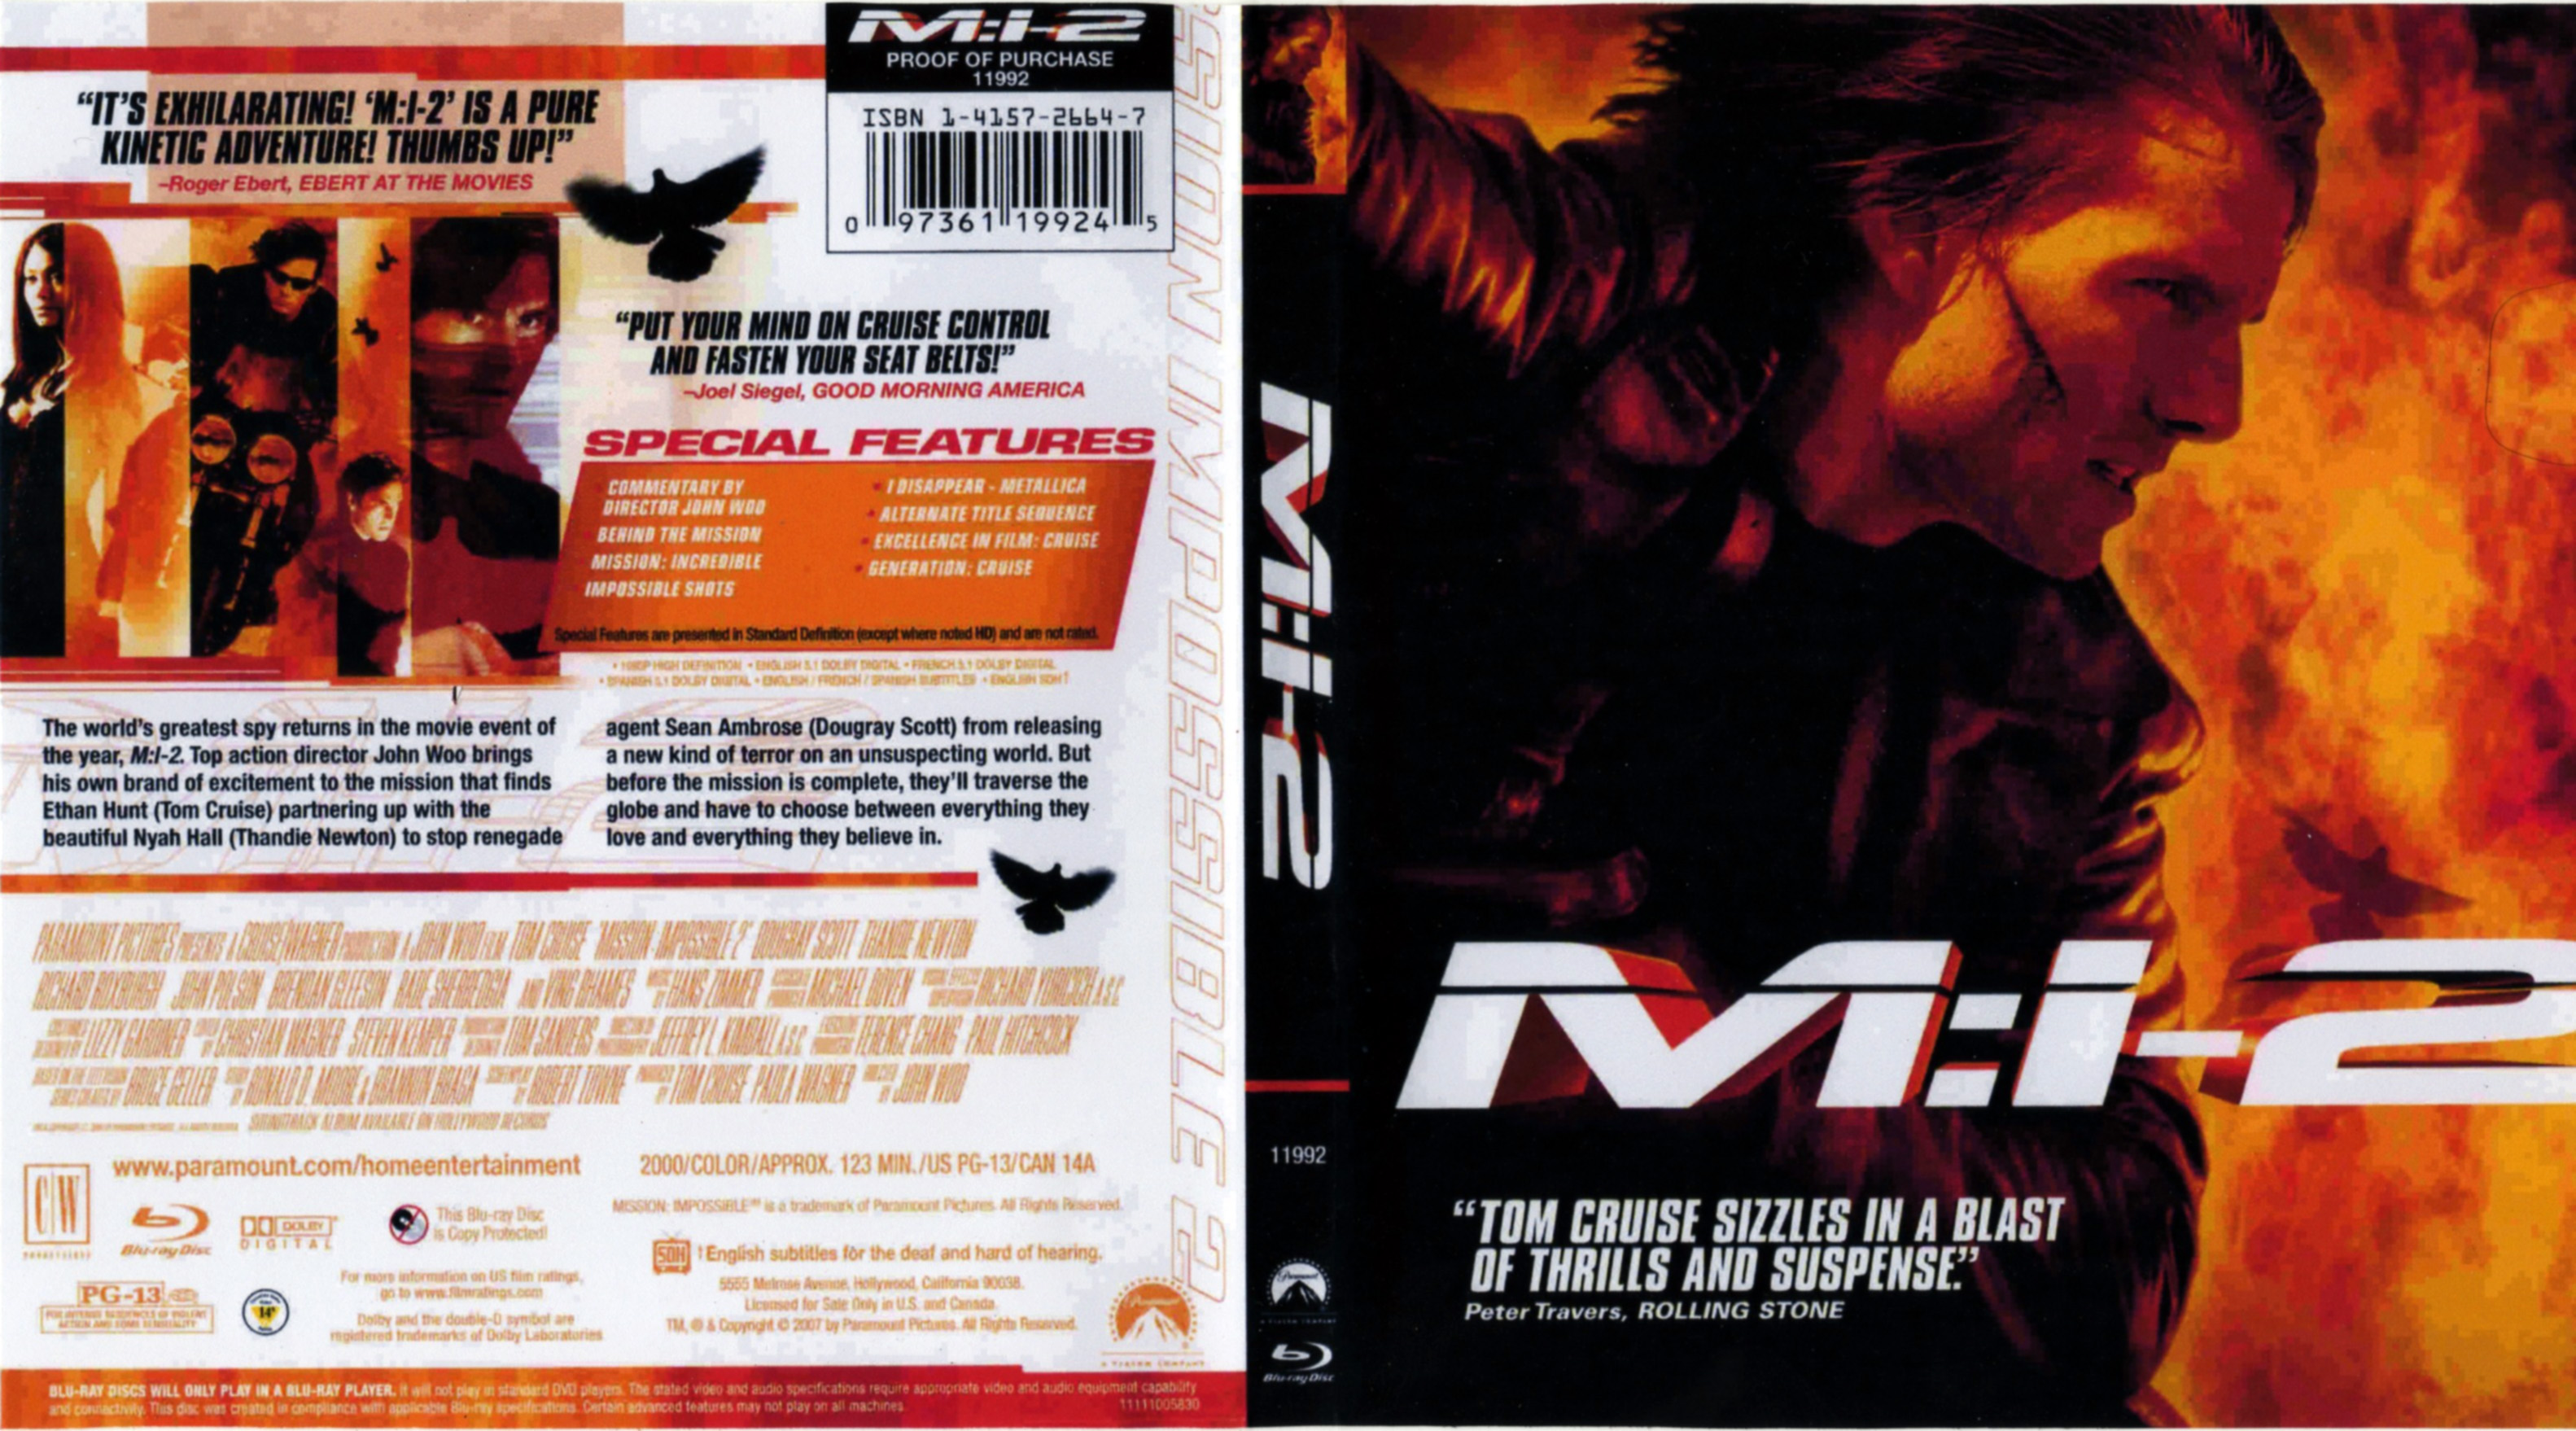 Jaquette DVD Mission impossible 2 (BLU-RAY) Zone 1